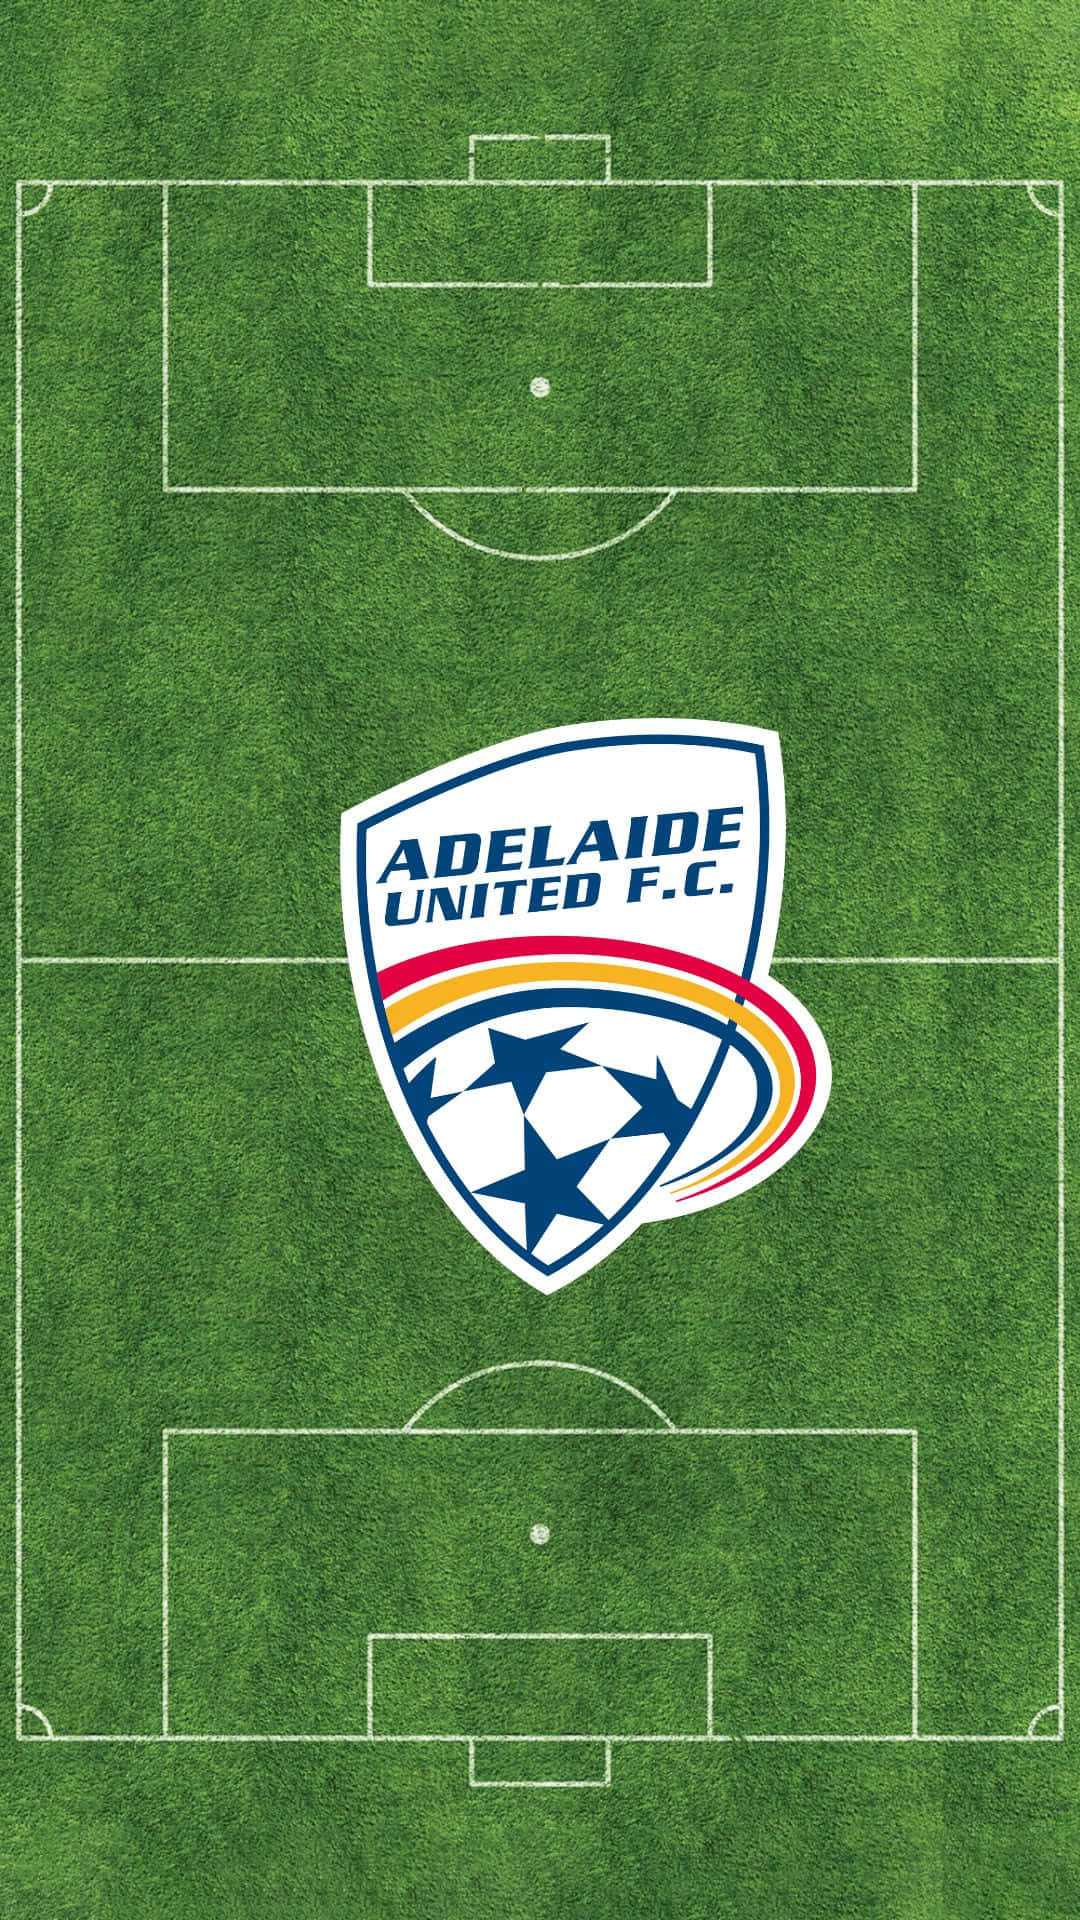 Adelaide United Players Celebrating on the Field Wallpaper